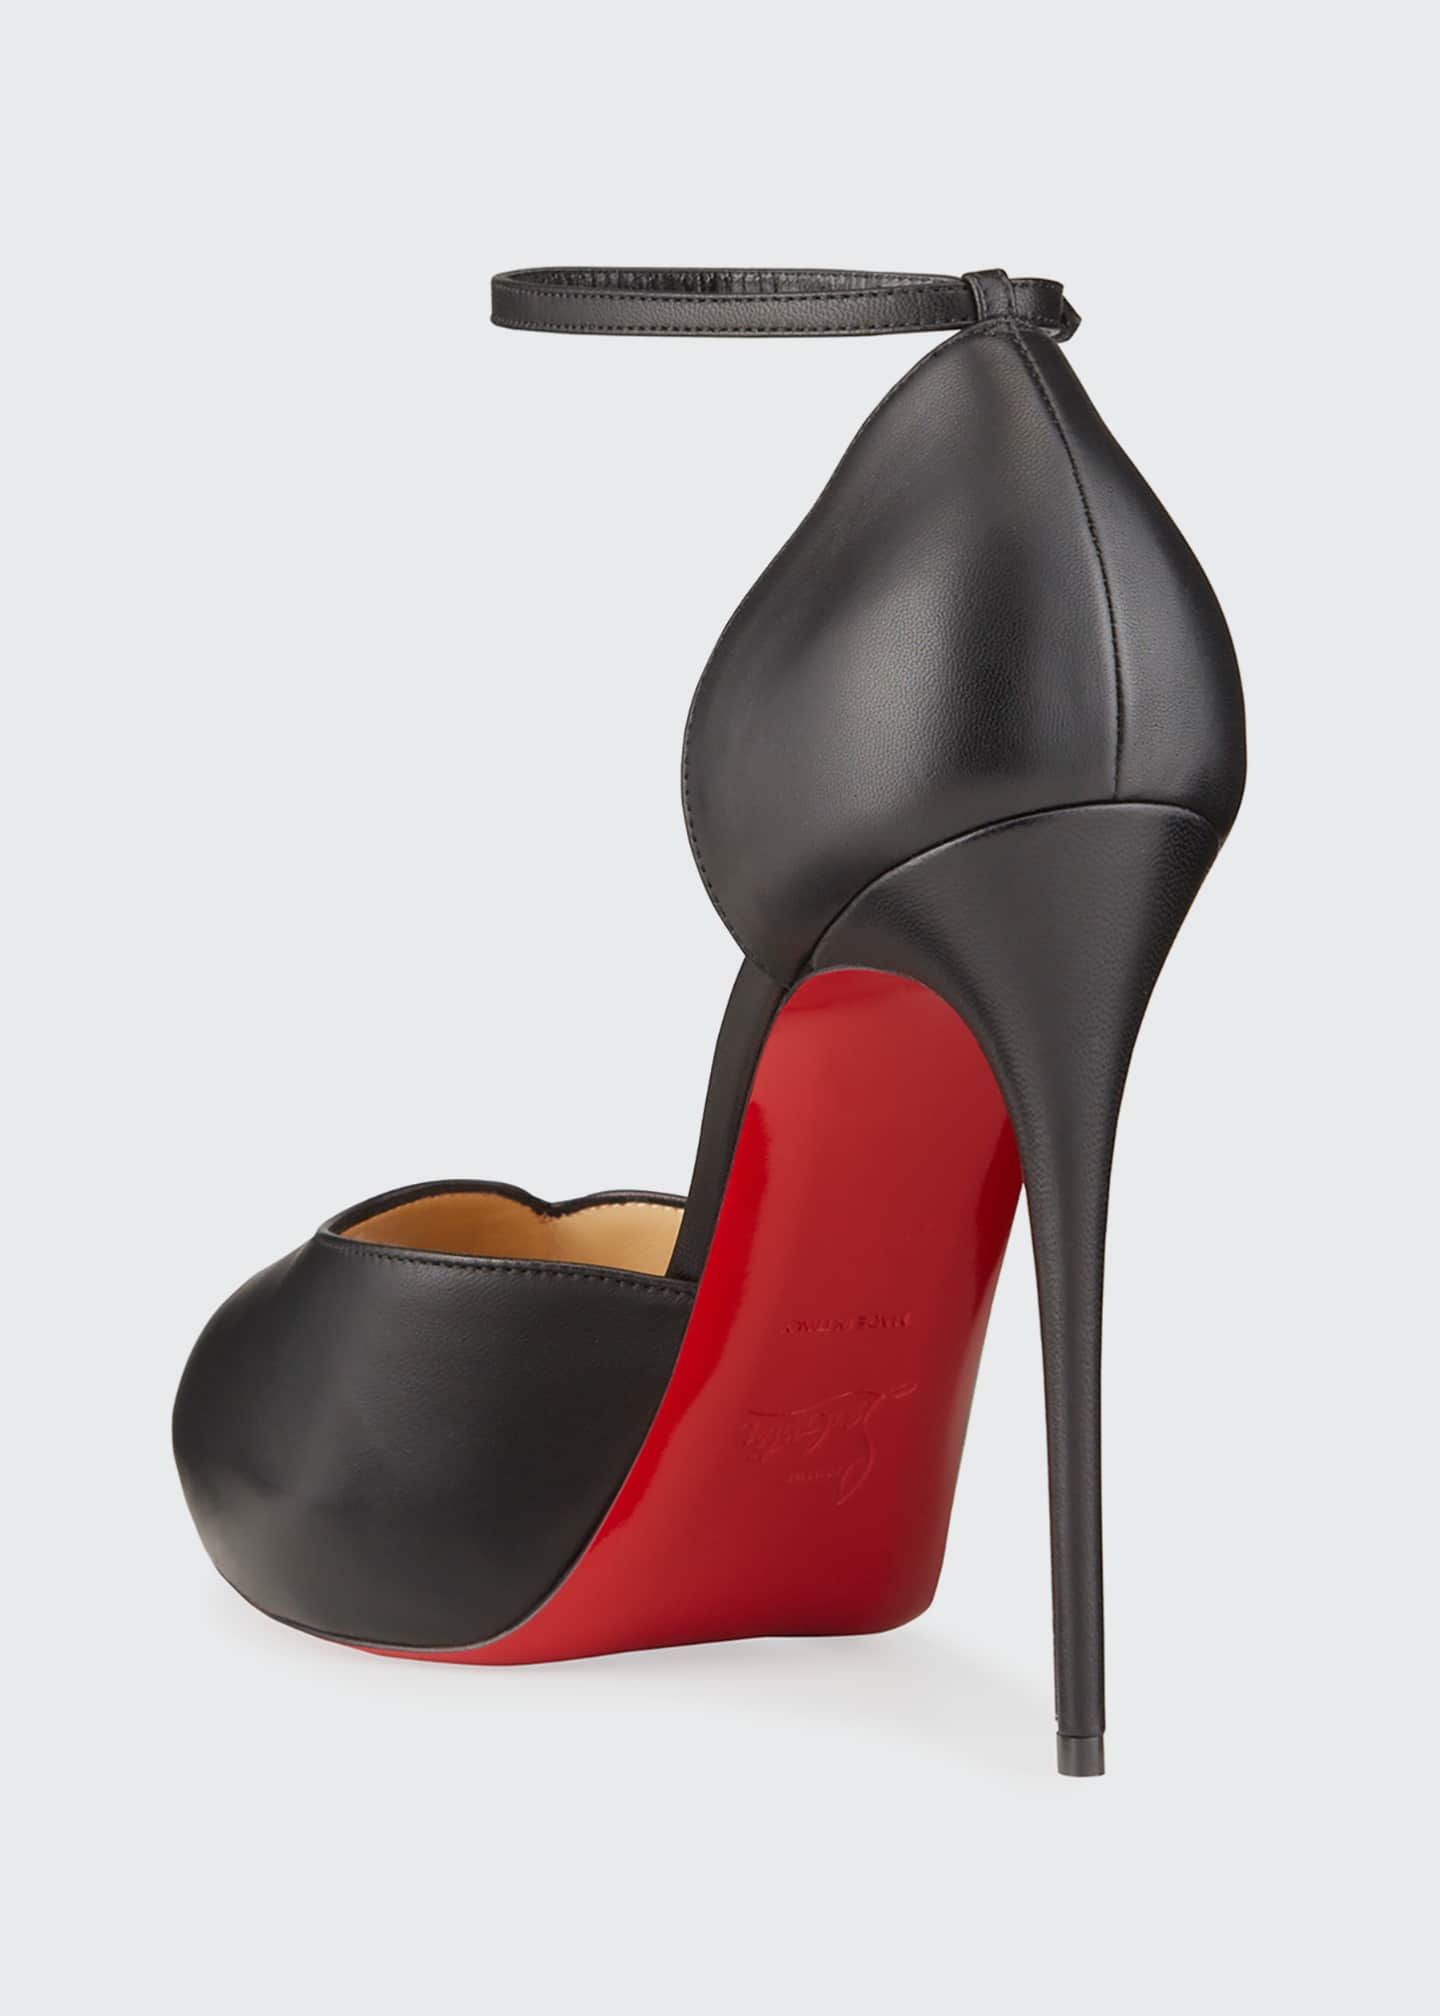 Christian Louboutin Round Chick Alta Red Sole Pumps - Bergdorf Goodman